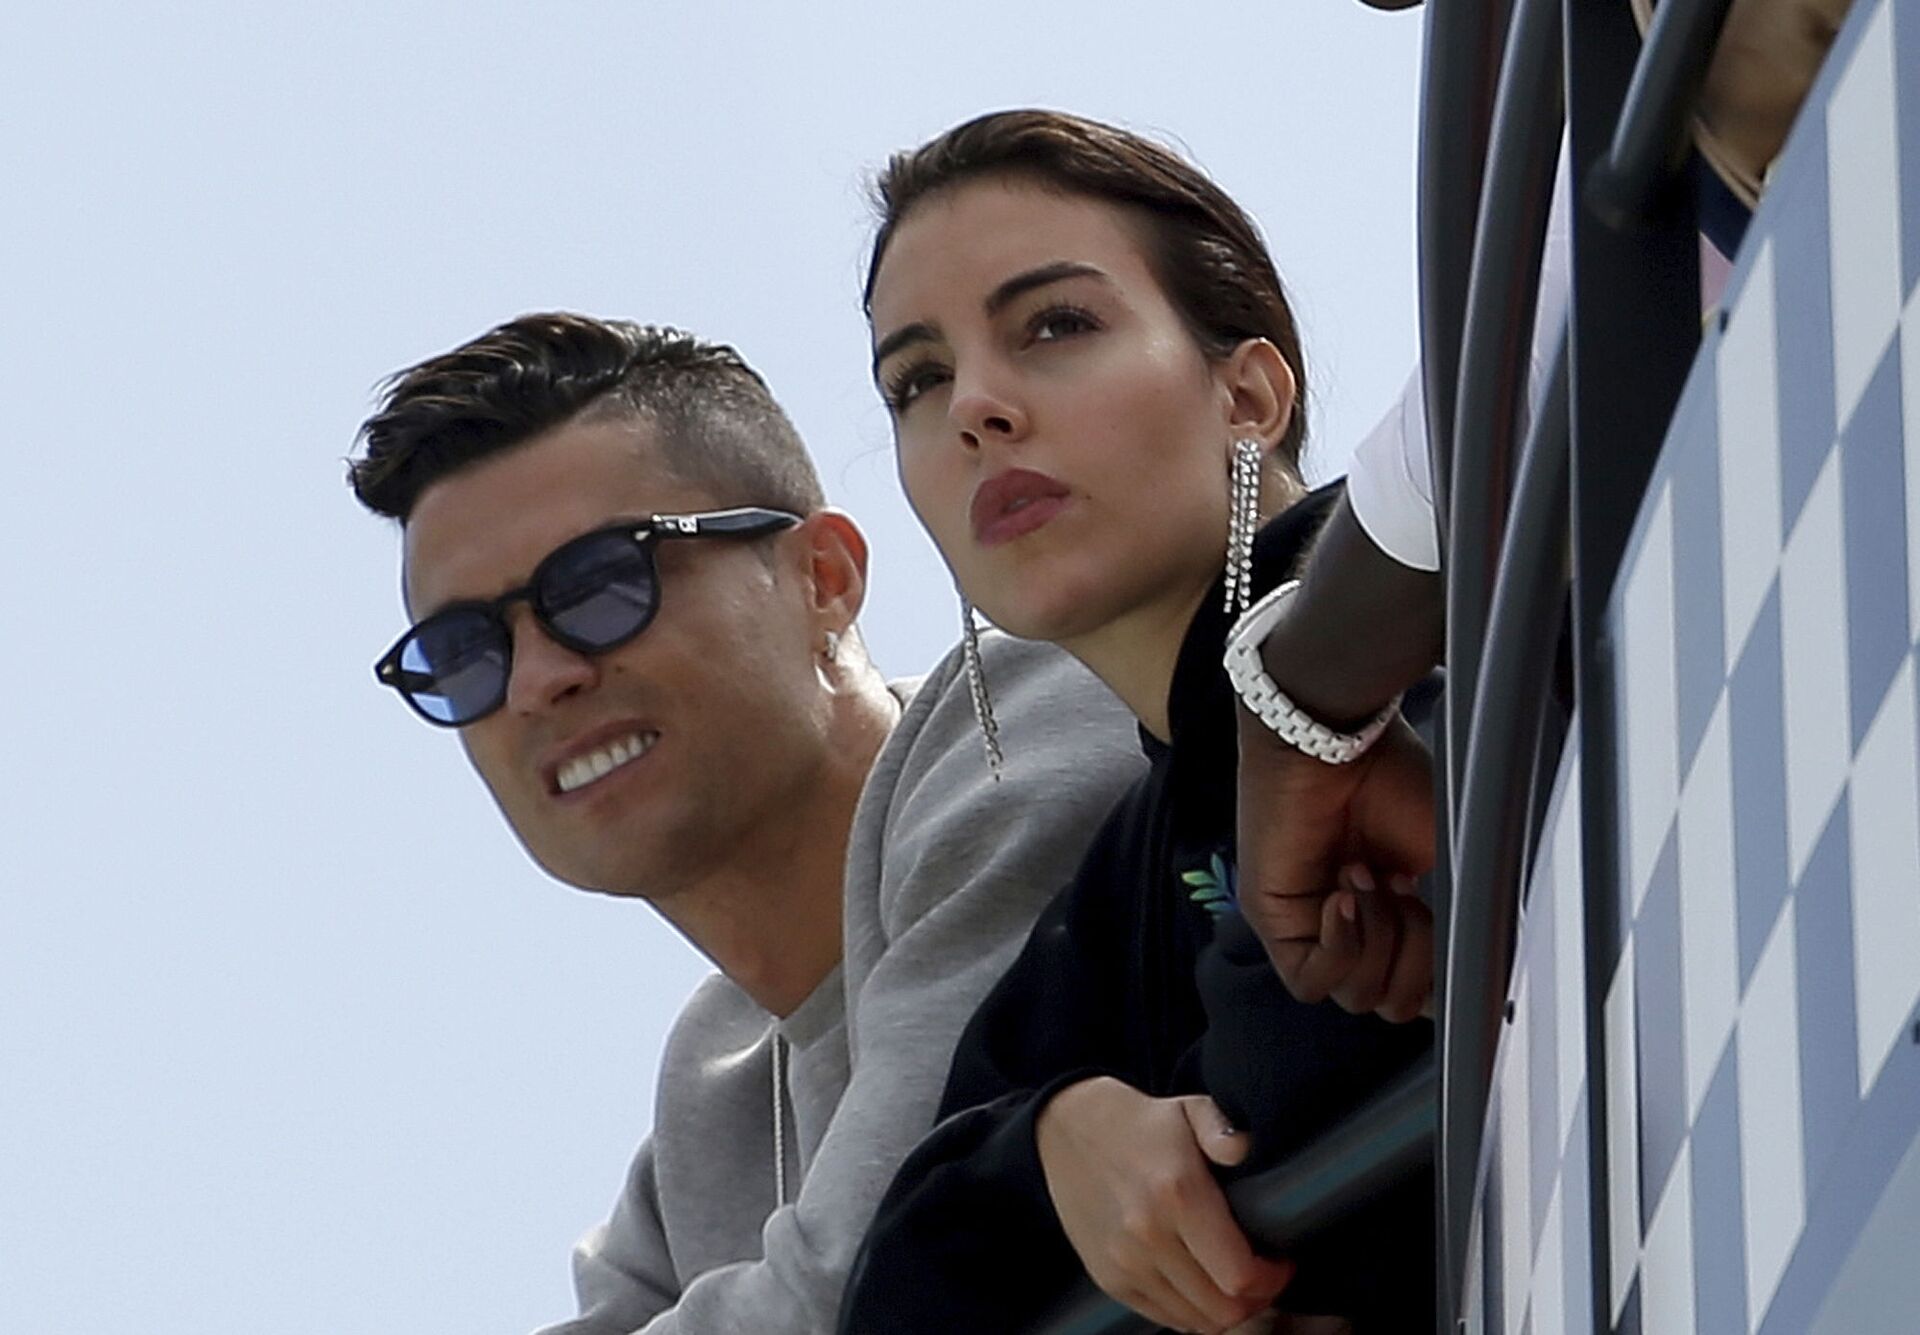  In this May 23, 2019, file photo, Cristiano Ronaldo, left, is flanked by his partner Georgina Rodriguez as they watch the second practice session for a Formula One race at the Monaco racetrack, in Monaco - Sputnik International, 1920, 07.09.2021